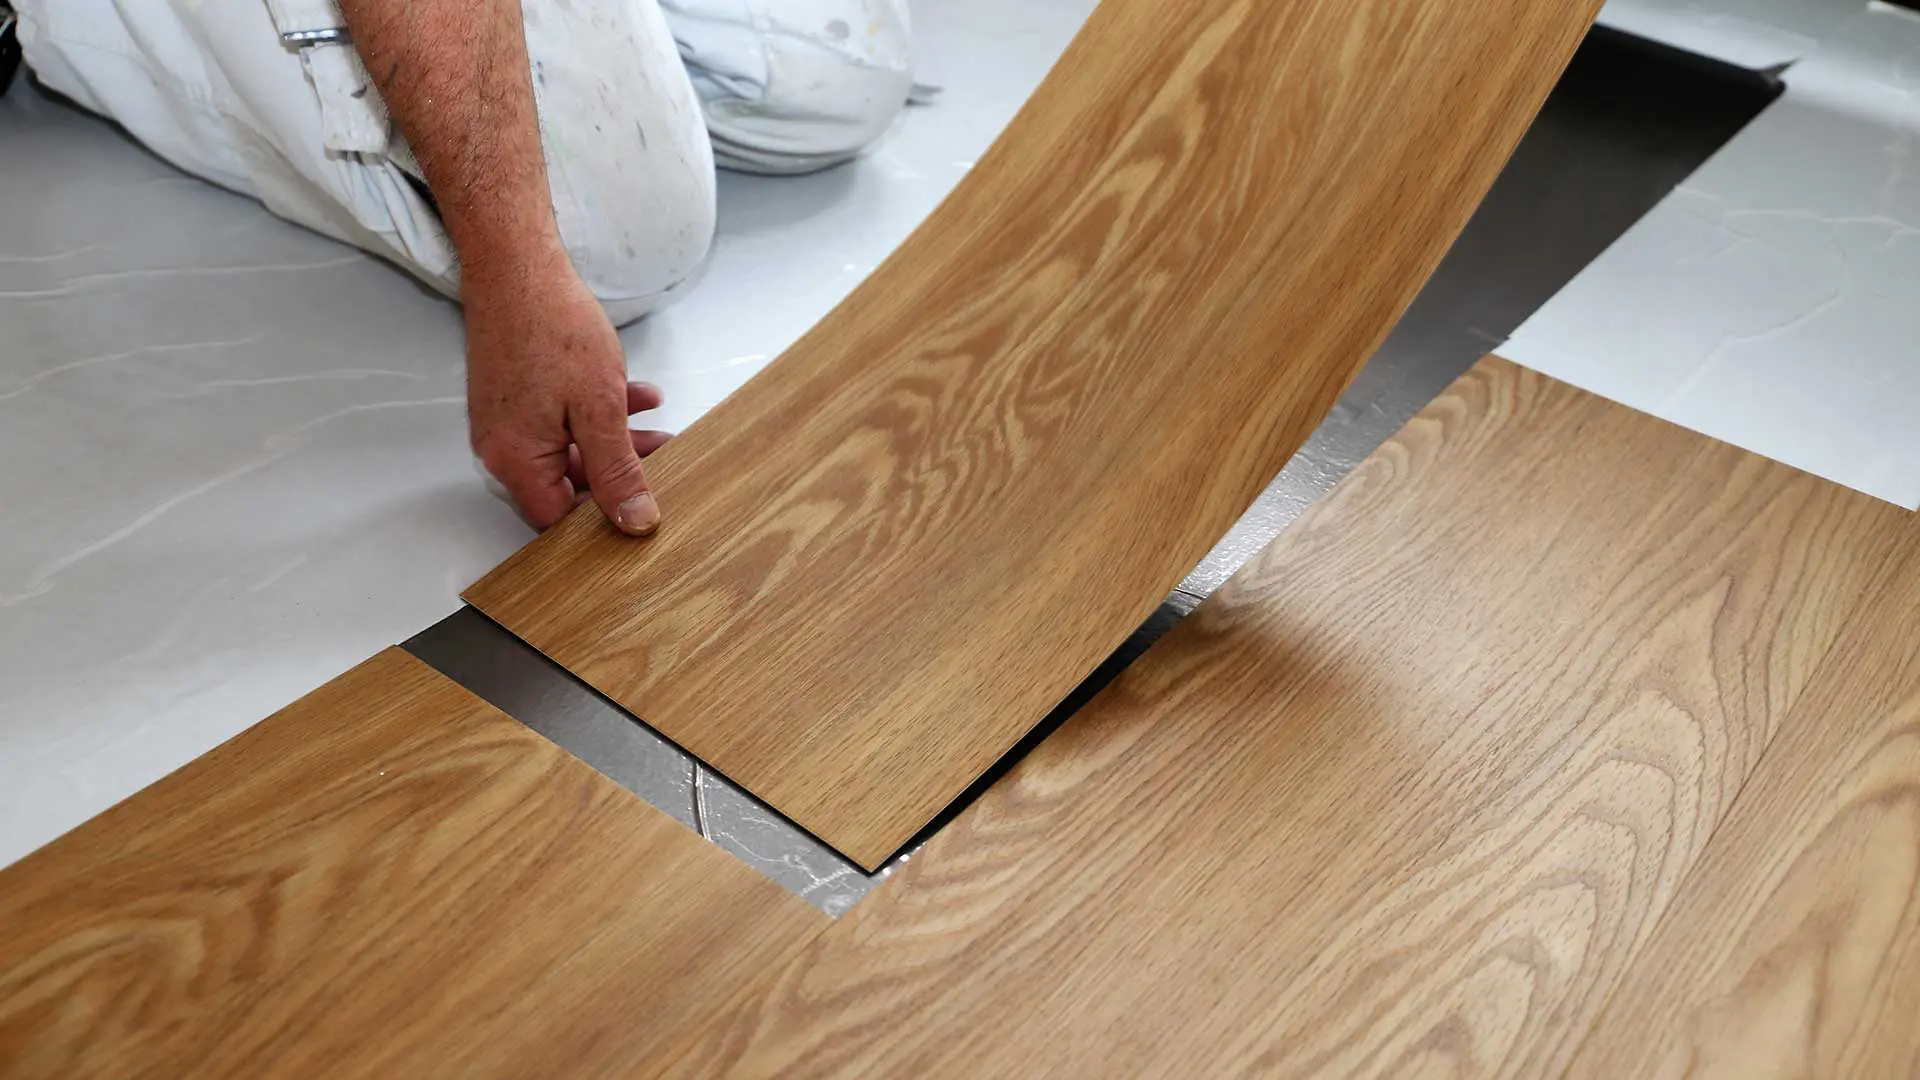 Flooring Industry Blogs, Products, Flooring Supplies and Insights